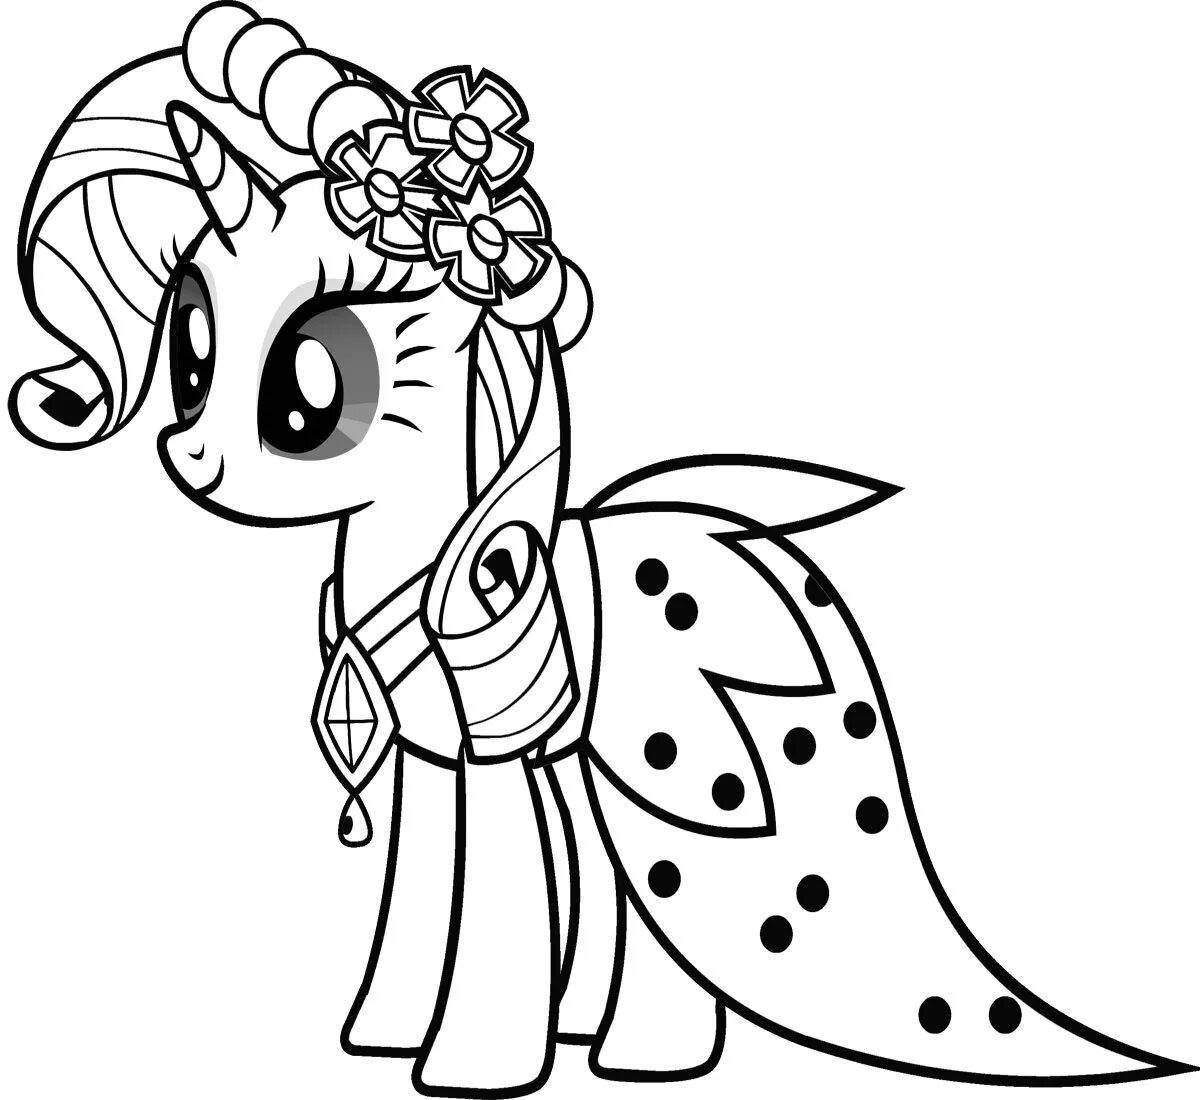 Sparkly baby pony coloring page